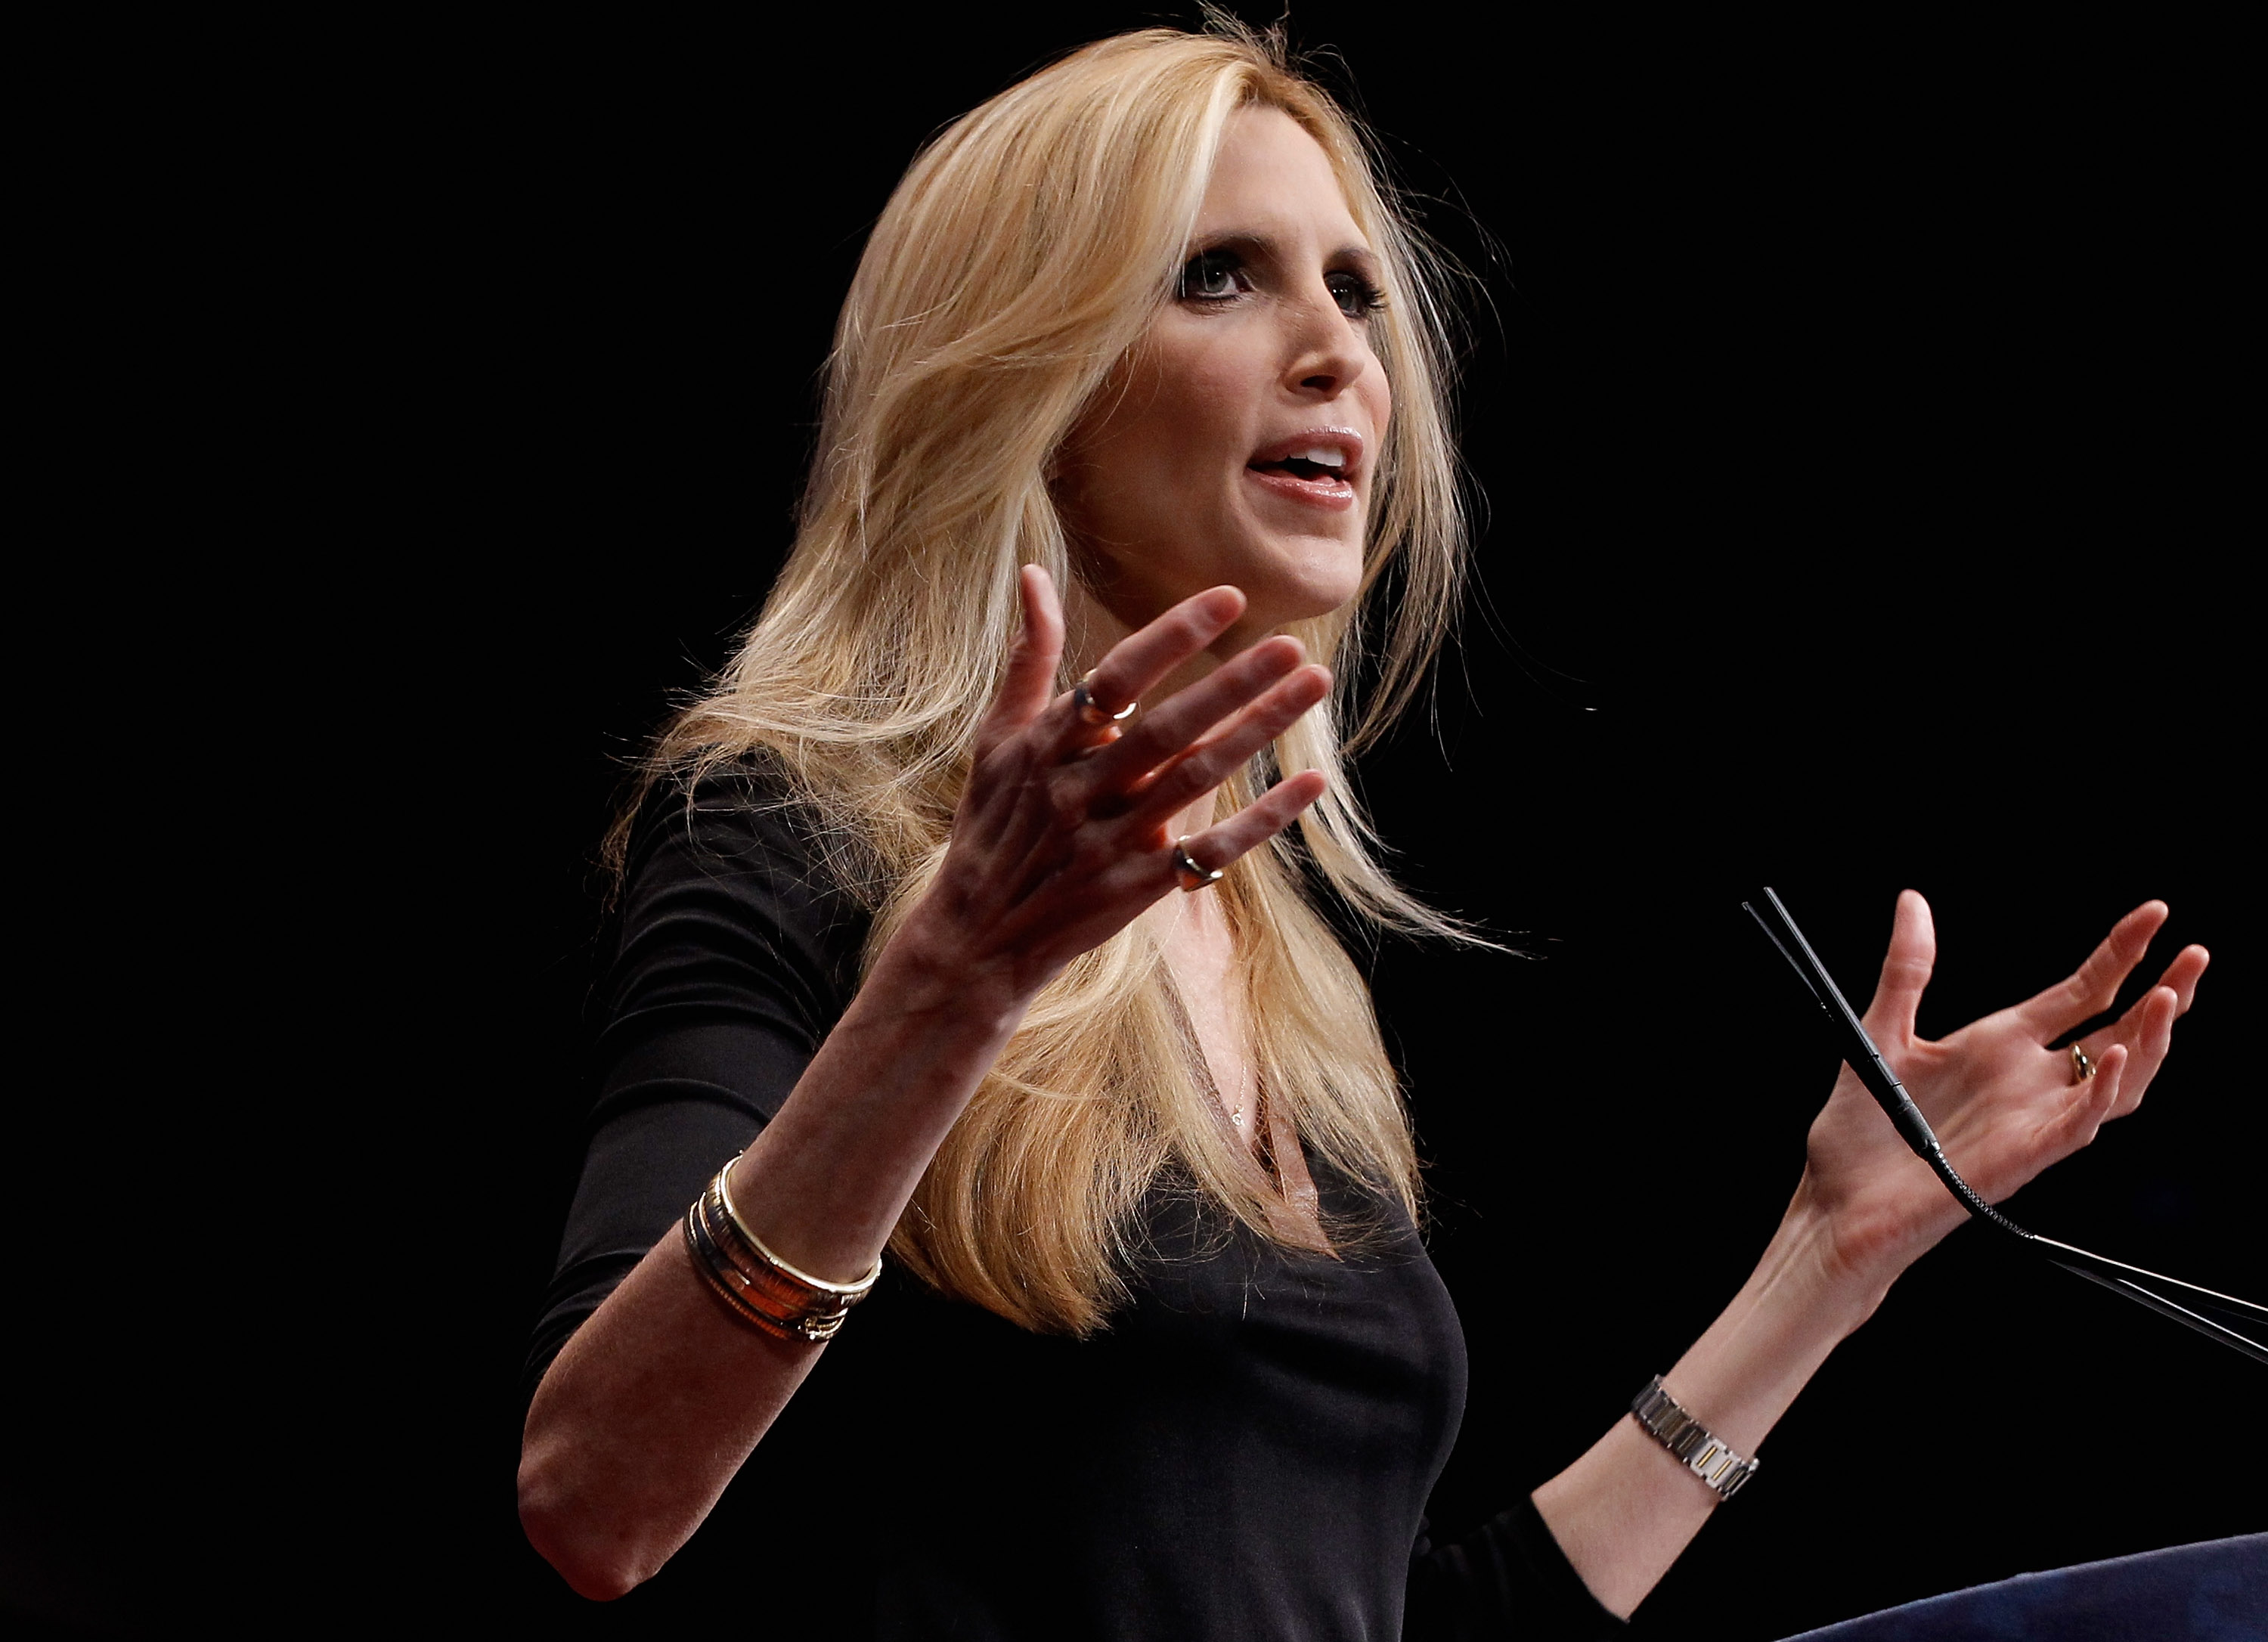 Ann Coulter delivers remarks to the Conservative Political Action Conference (CPAC) at the Marriott Wardman Park February 10, 2012 in Washington, DC. (Chip Somodevilla&mdash;Getty Images)